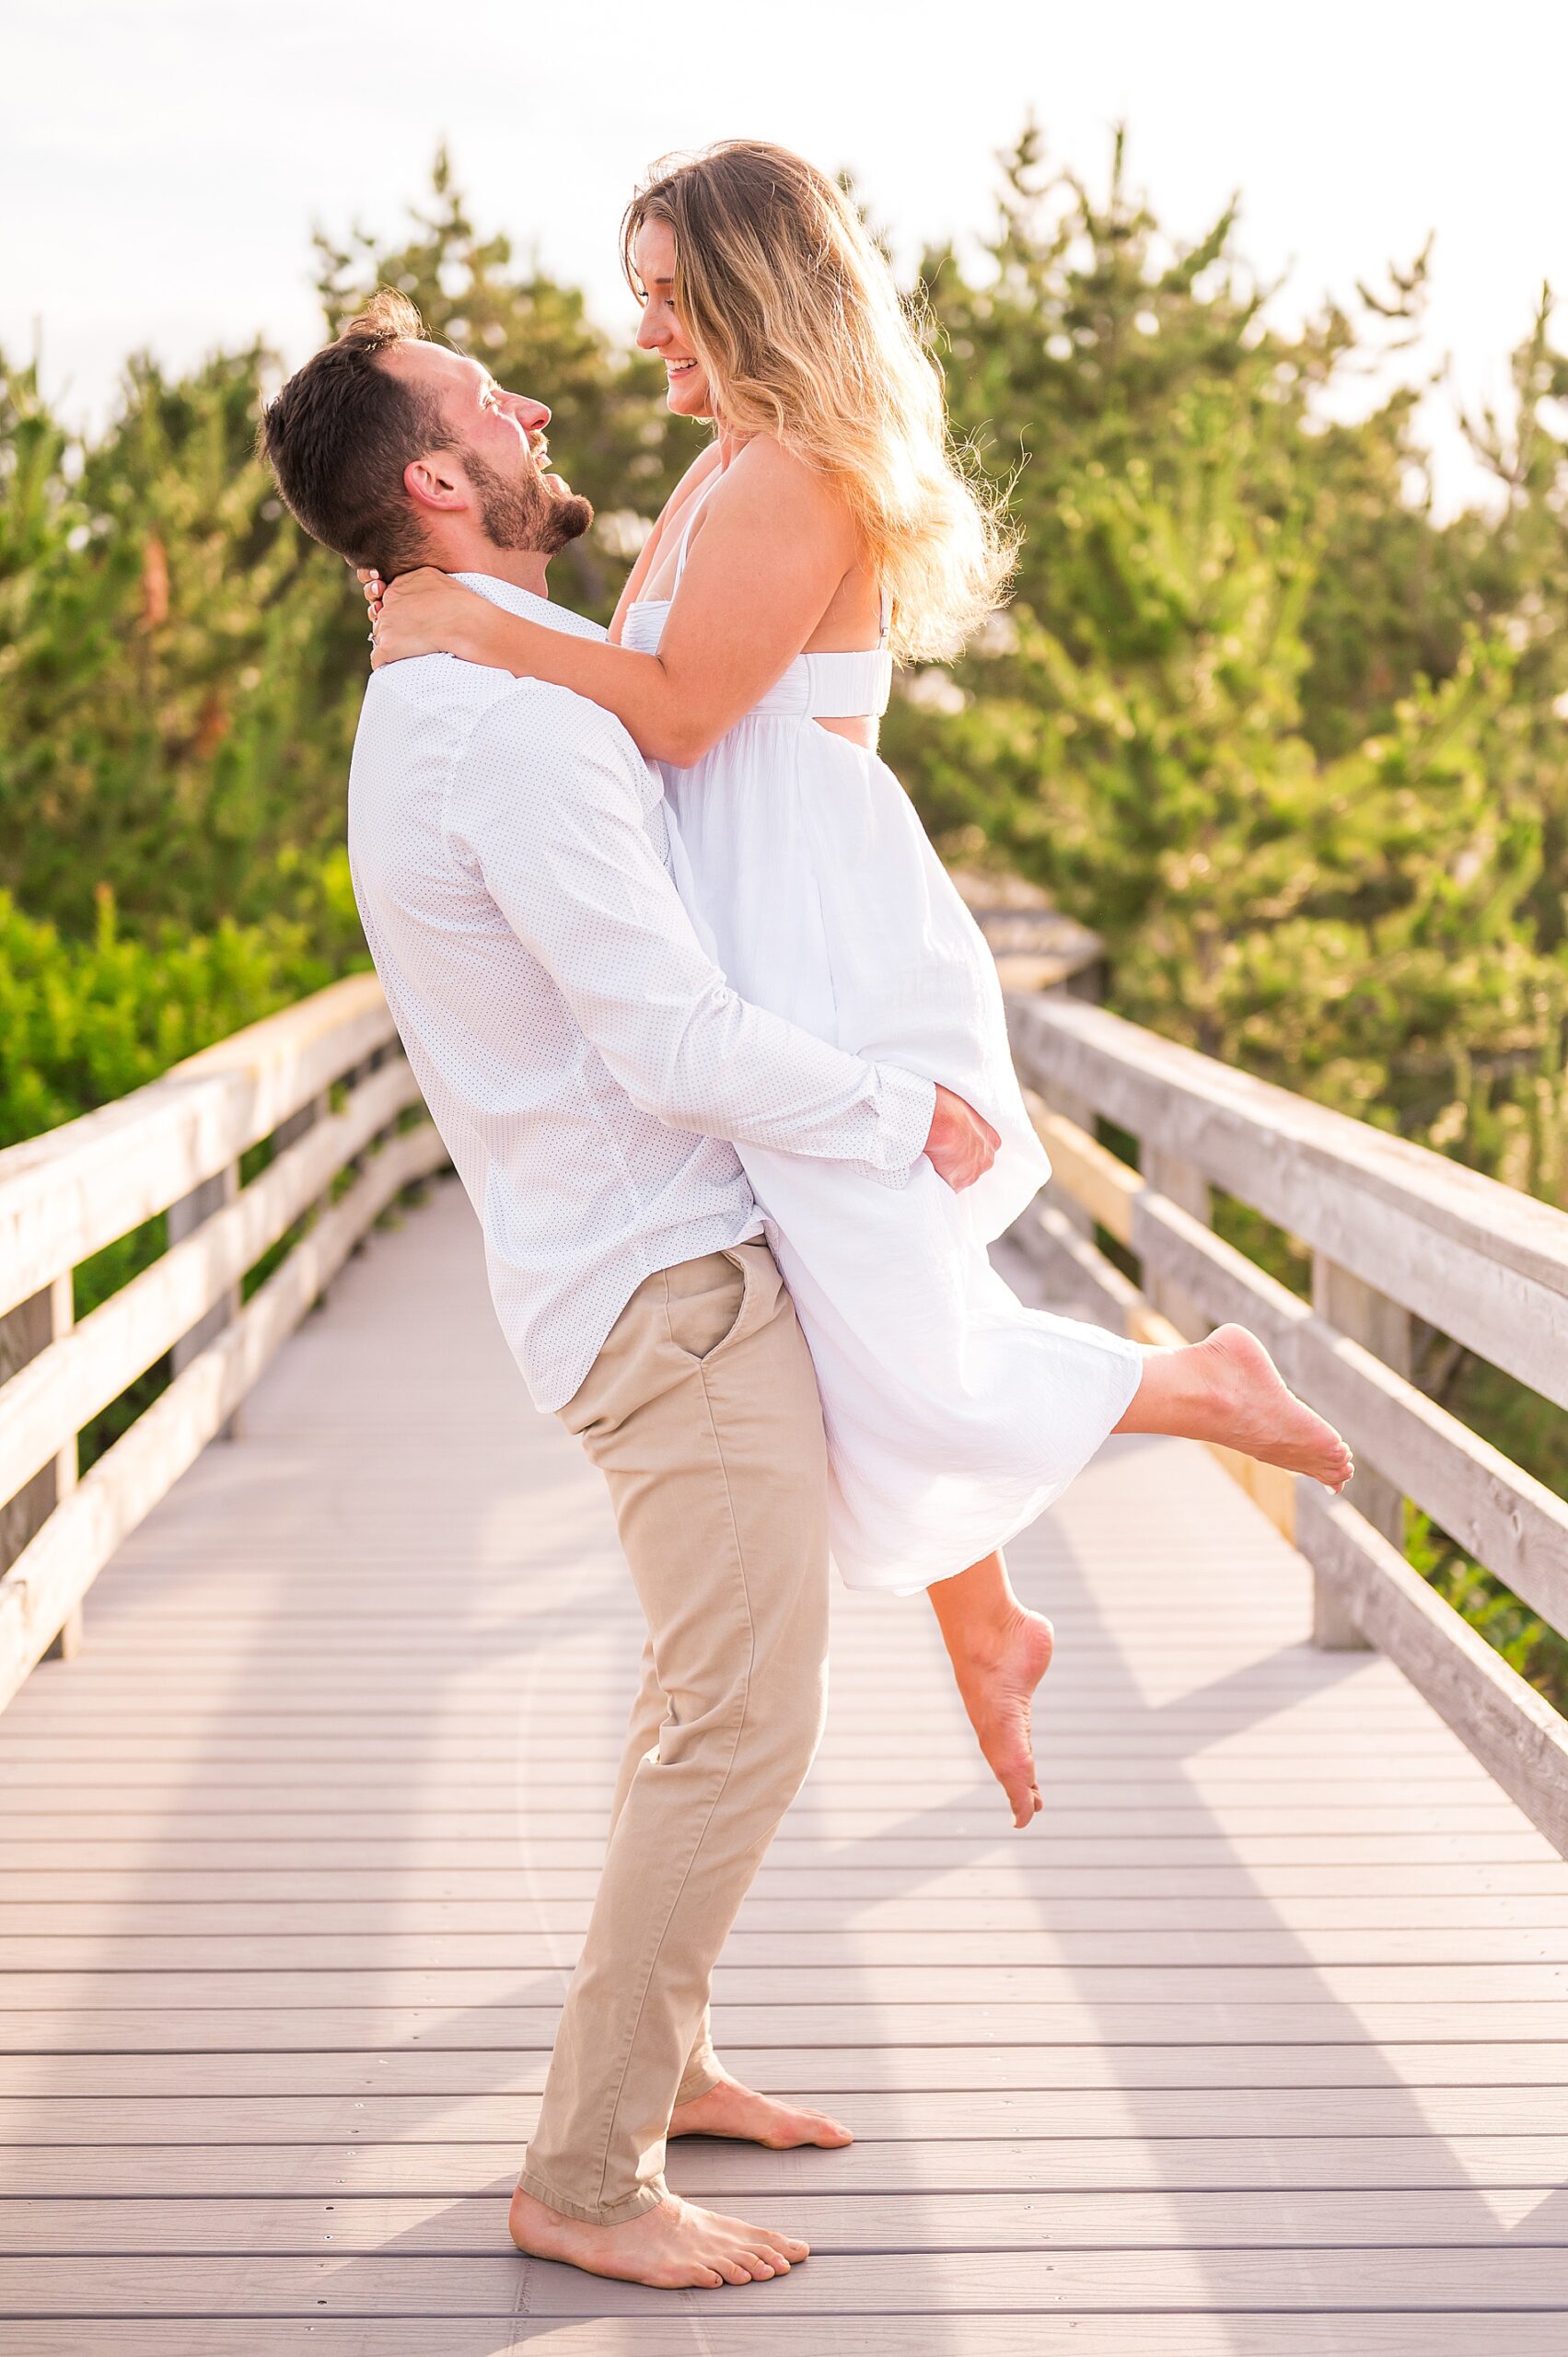 guy lifts up his fiance during engagement portraits